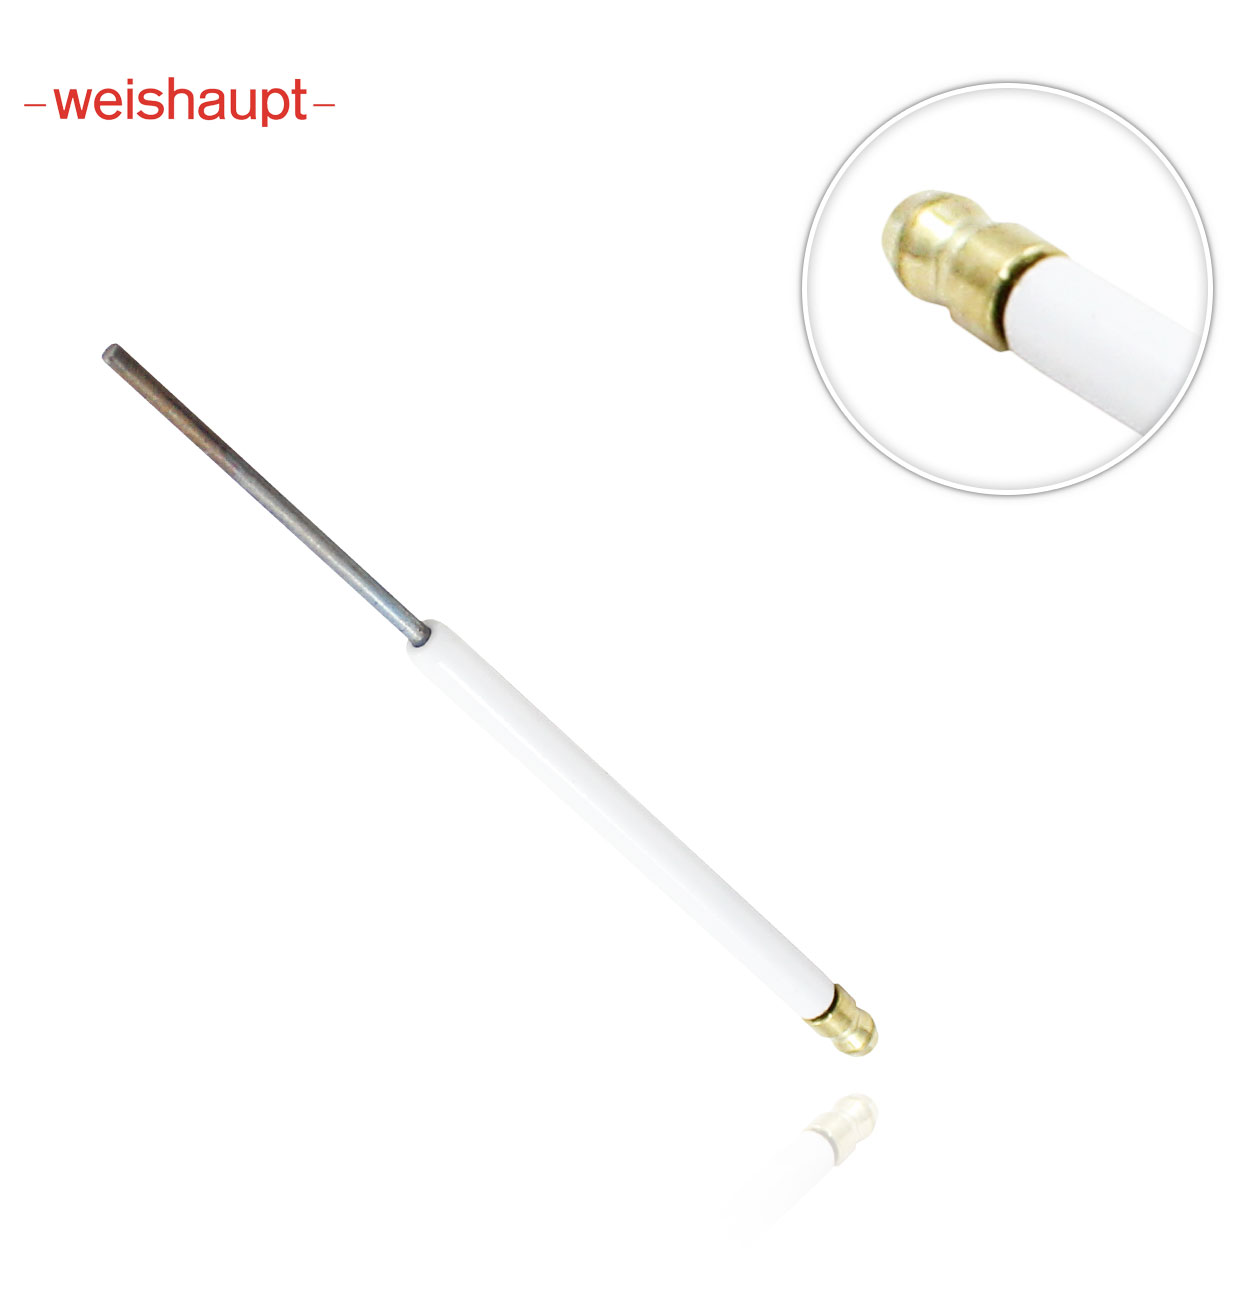 IONISATION ELECTRODE FOR WG 30  WEISHAUPT 13210114047